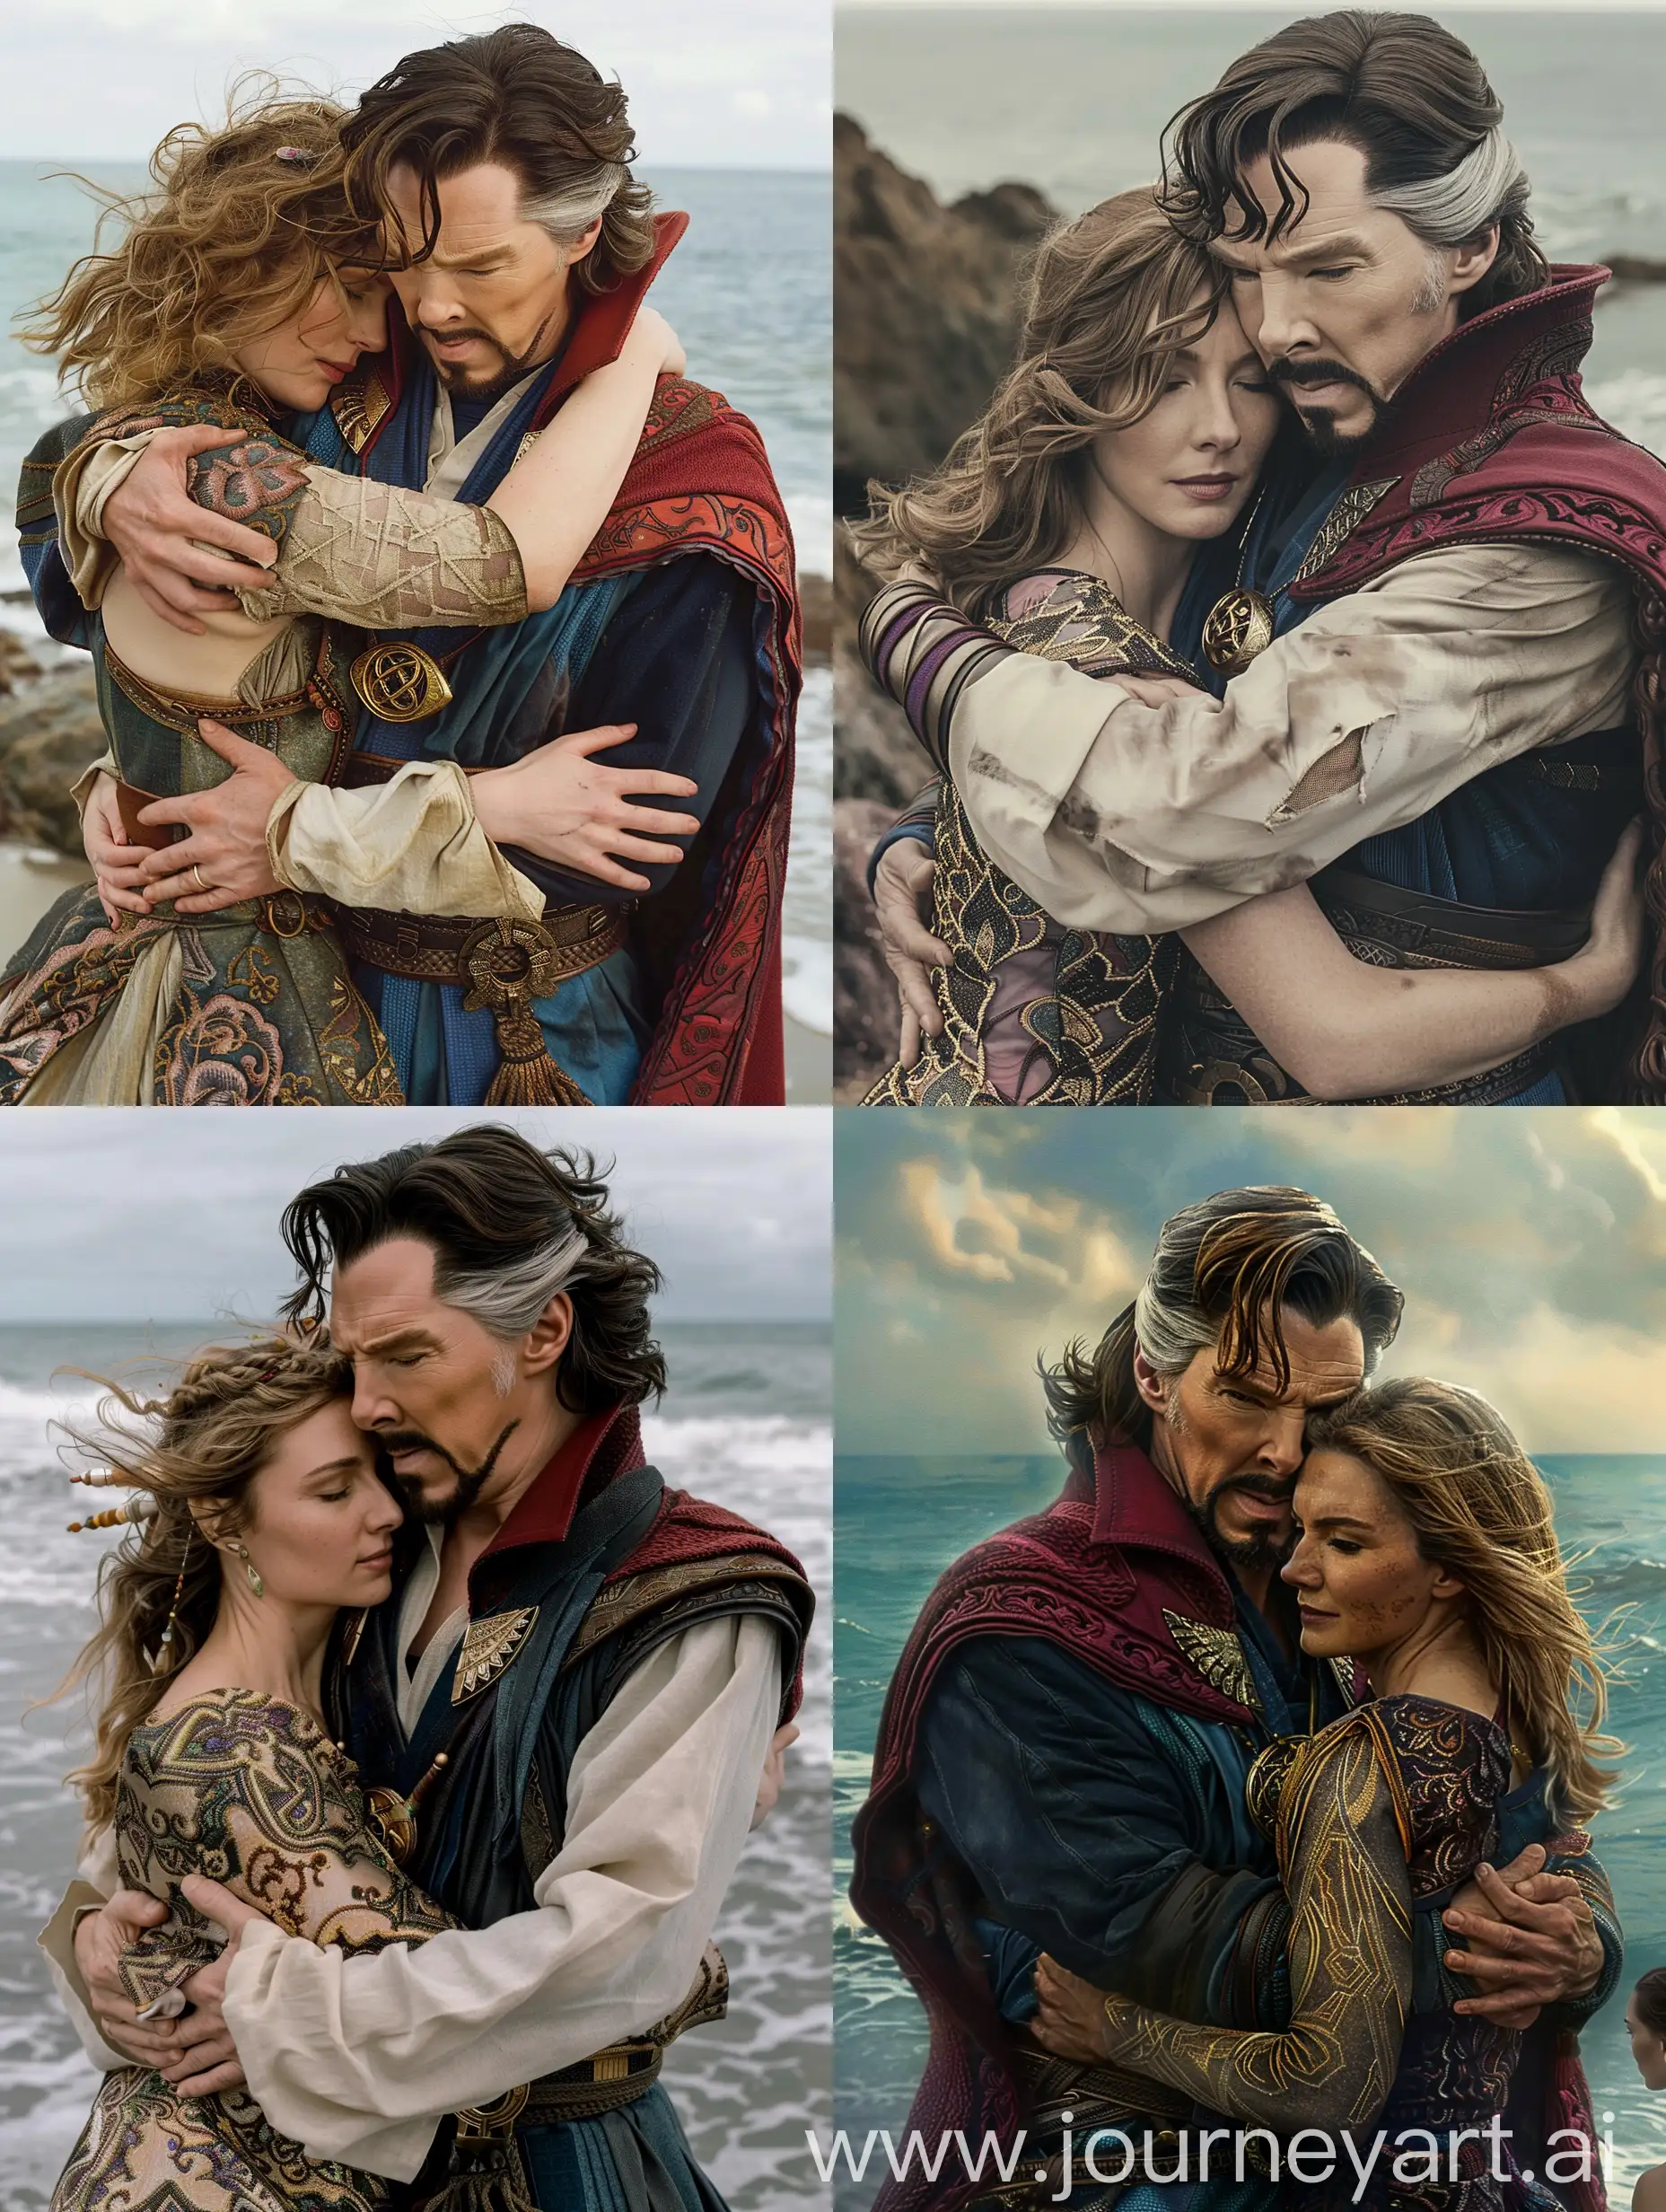 Doctor-Strange-Embraces-Woman-by-the-Sea-in-Bohemian-Chic